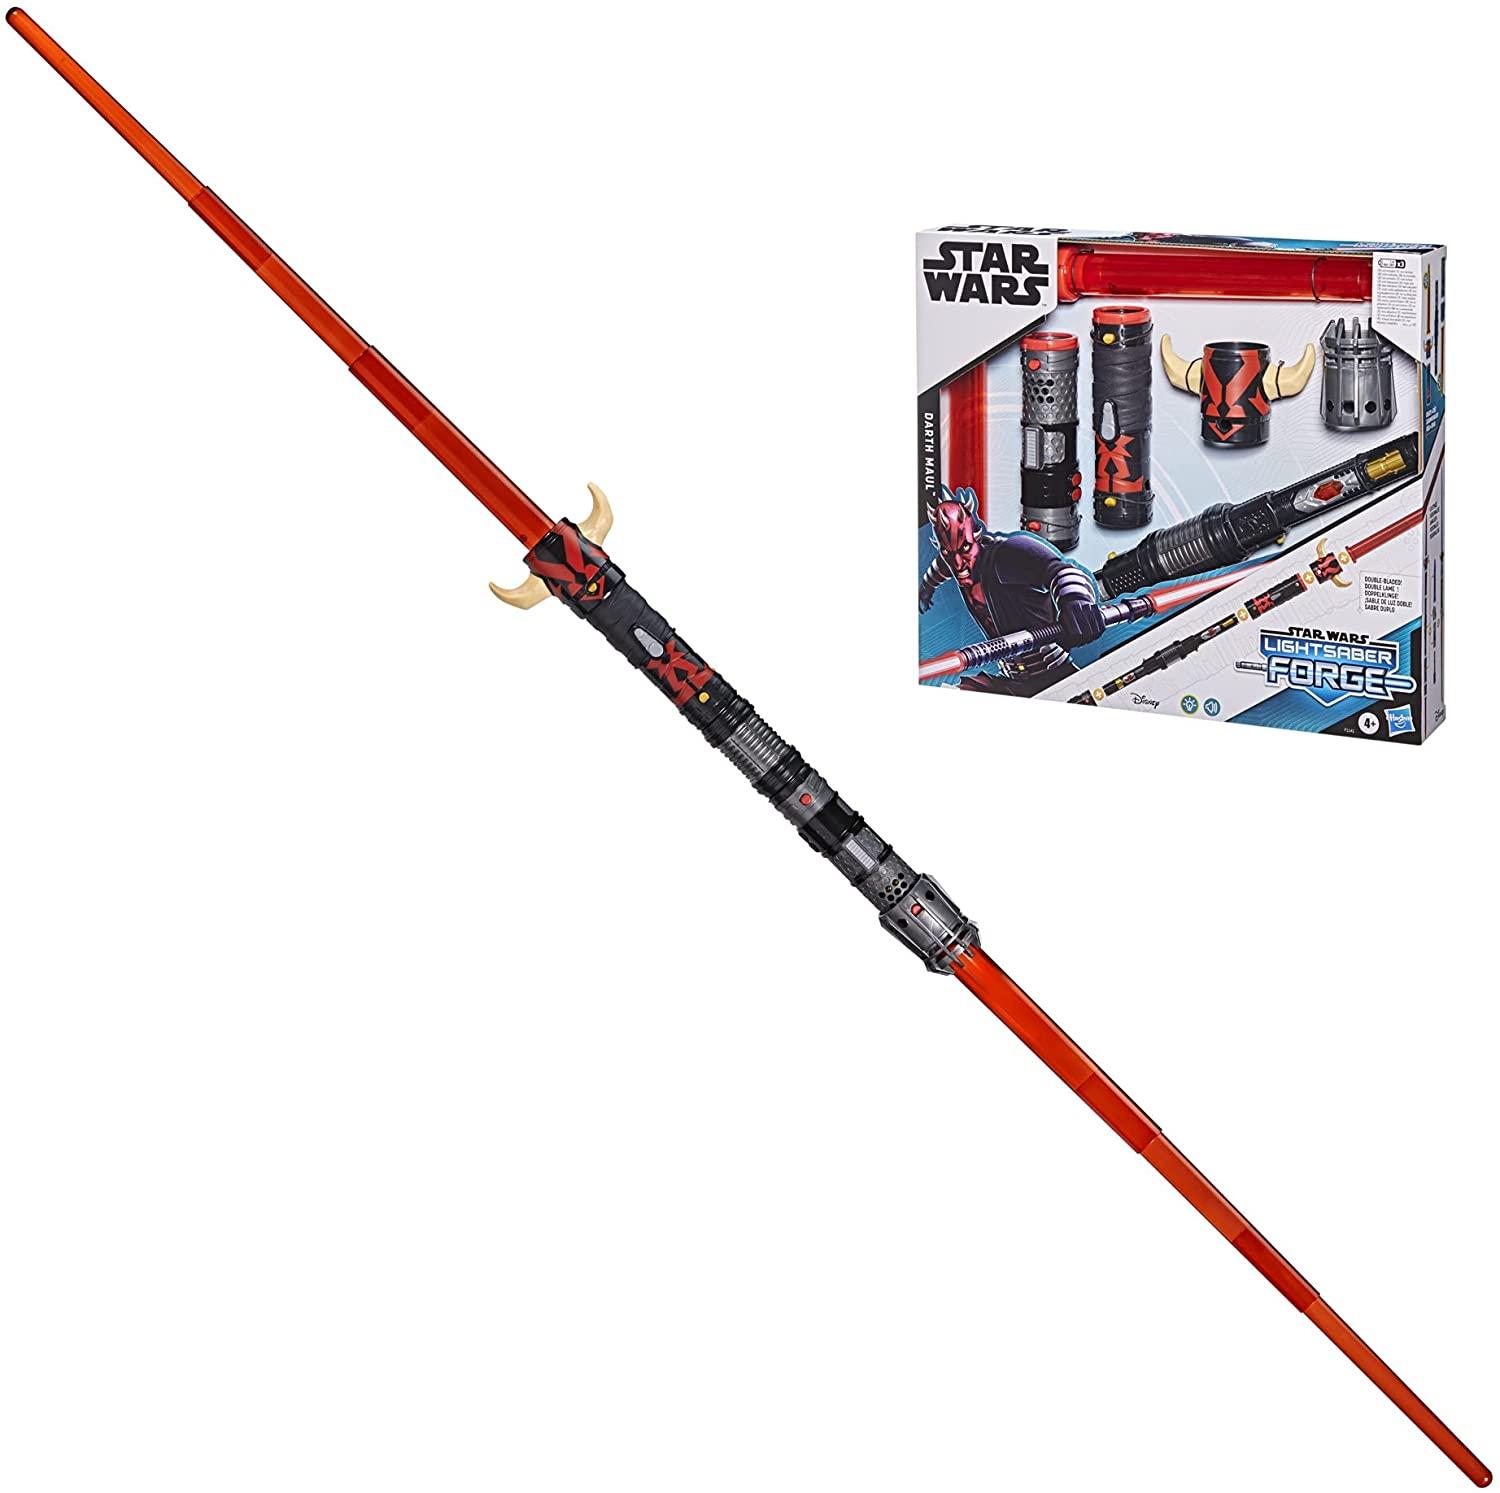 Star Wars Forge Double-Bladed Darth Maul Electronic Lightsaber for $20.99